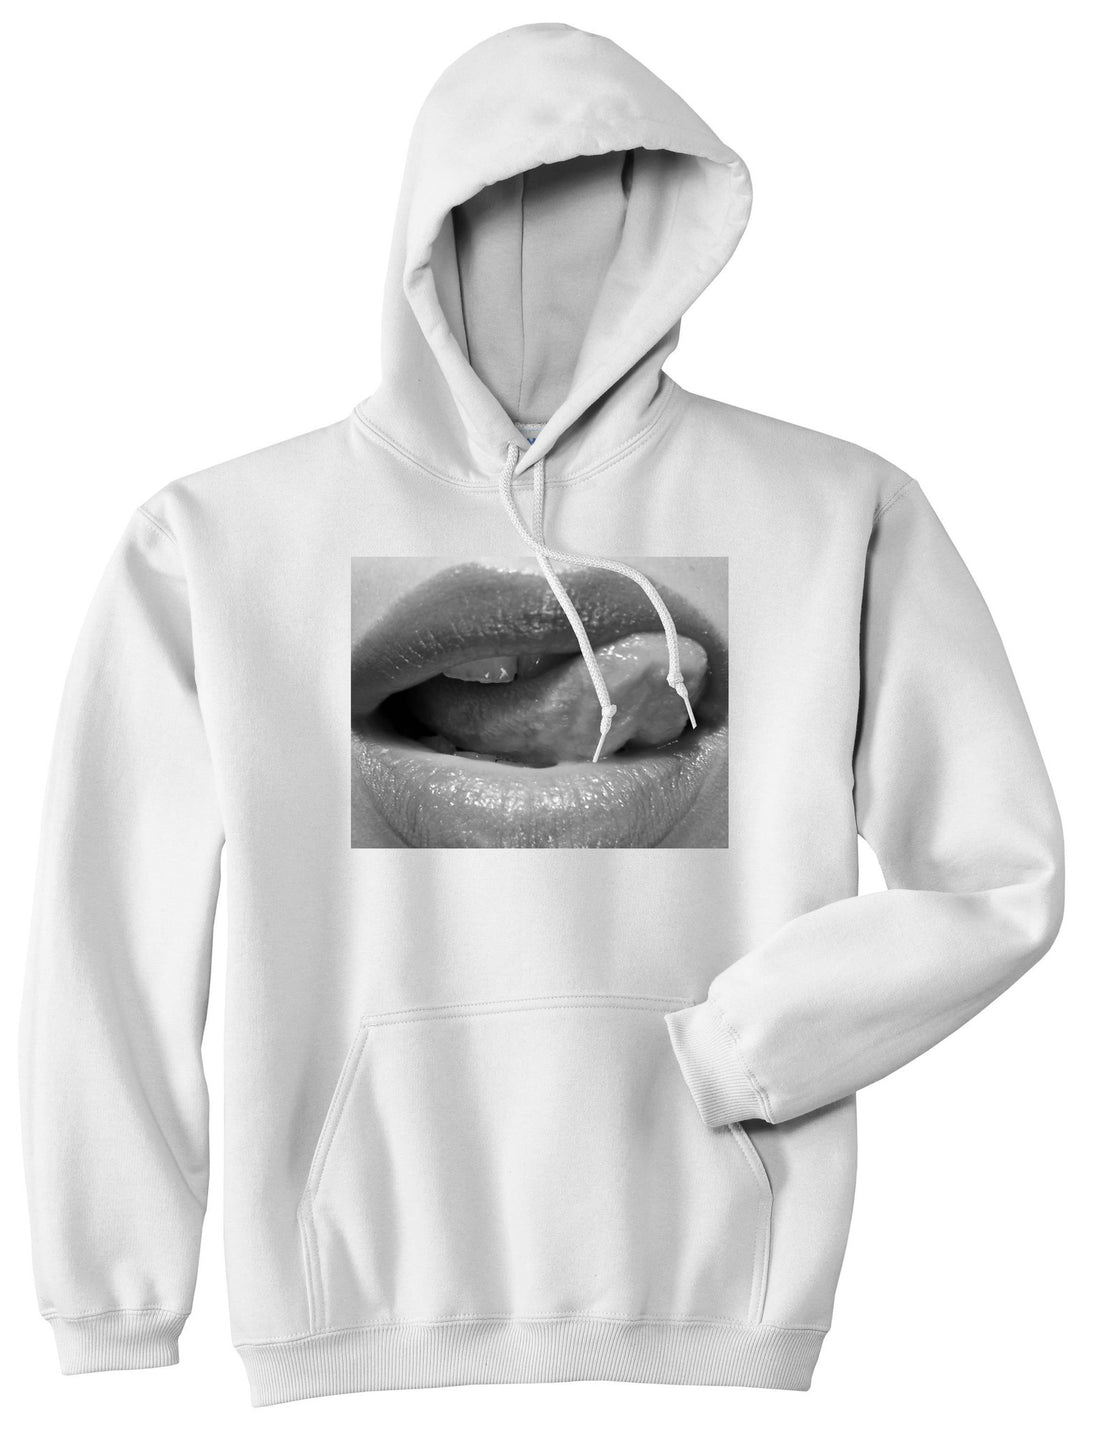 Togue Licking Lips Pullover Hoodie Hoody By Kings Of NY